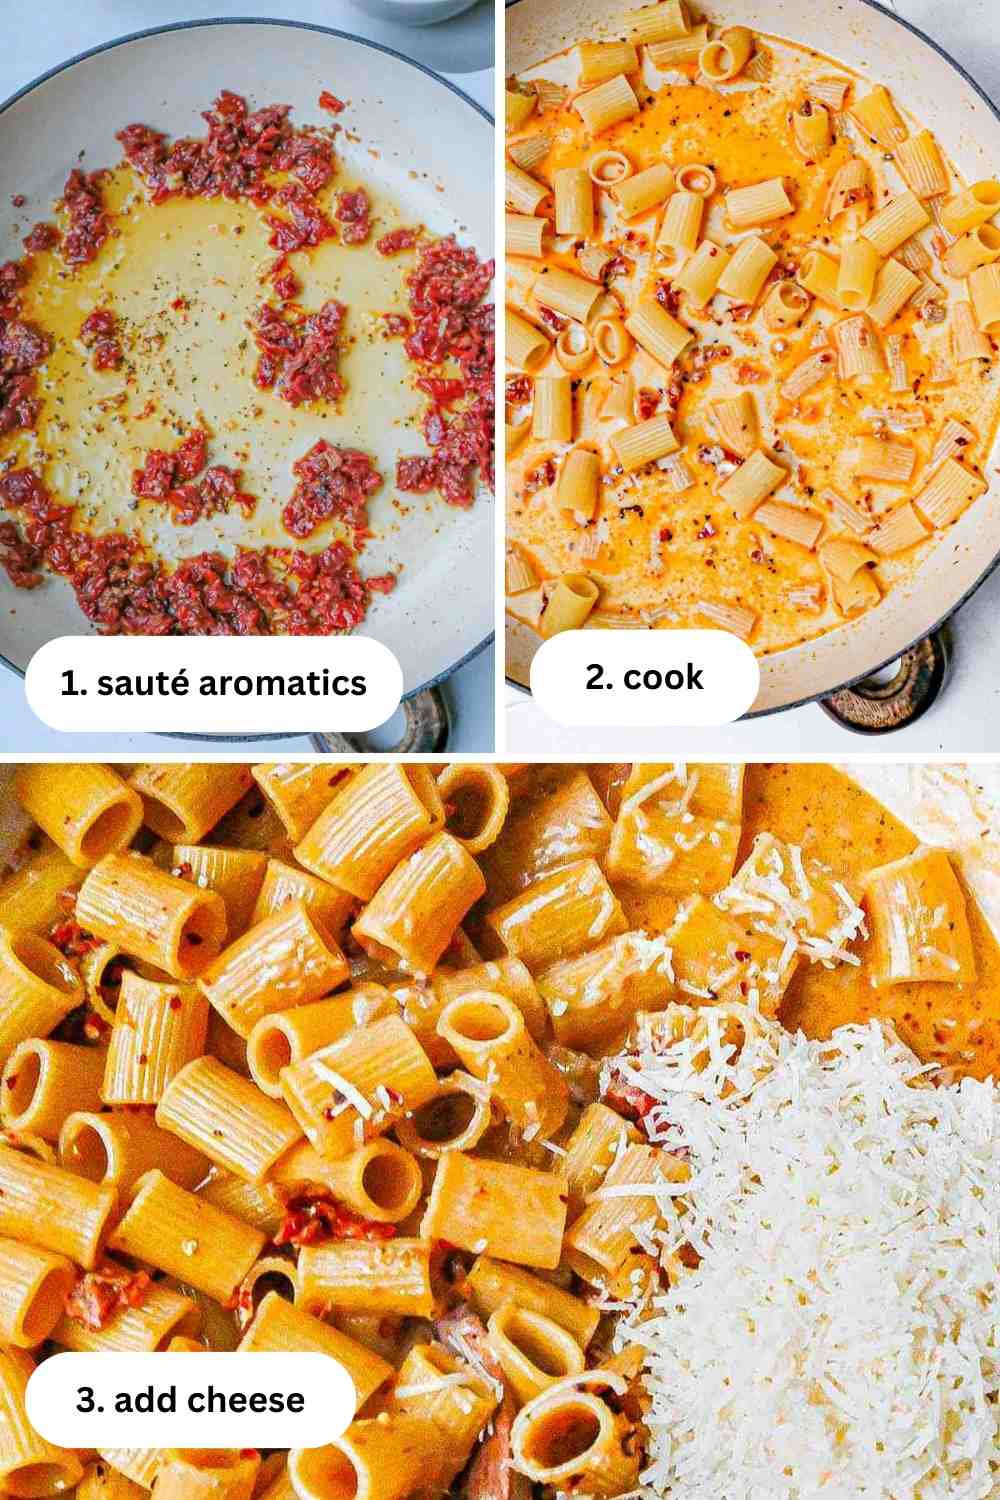 process steps for sundried tomato pasta